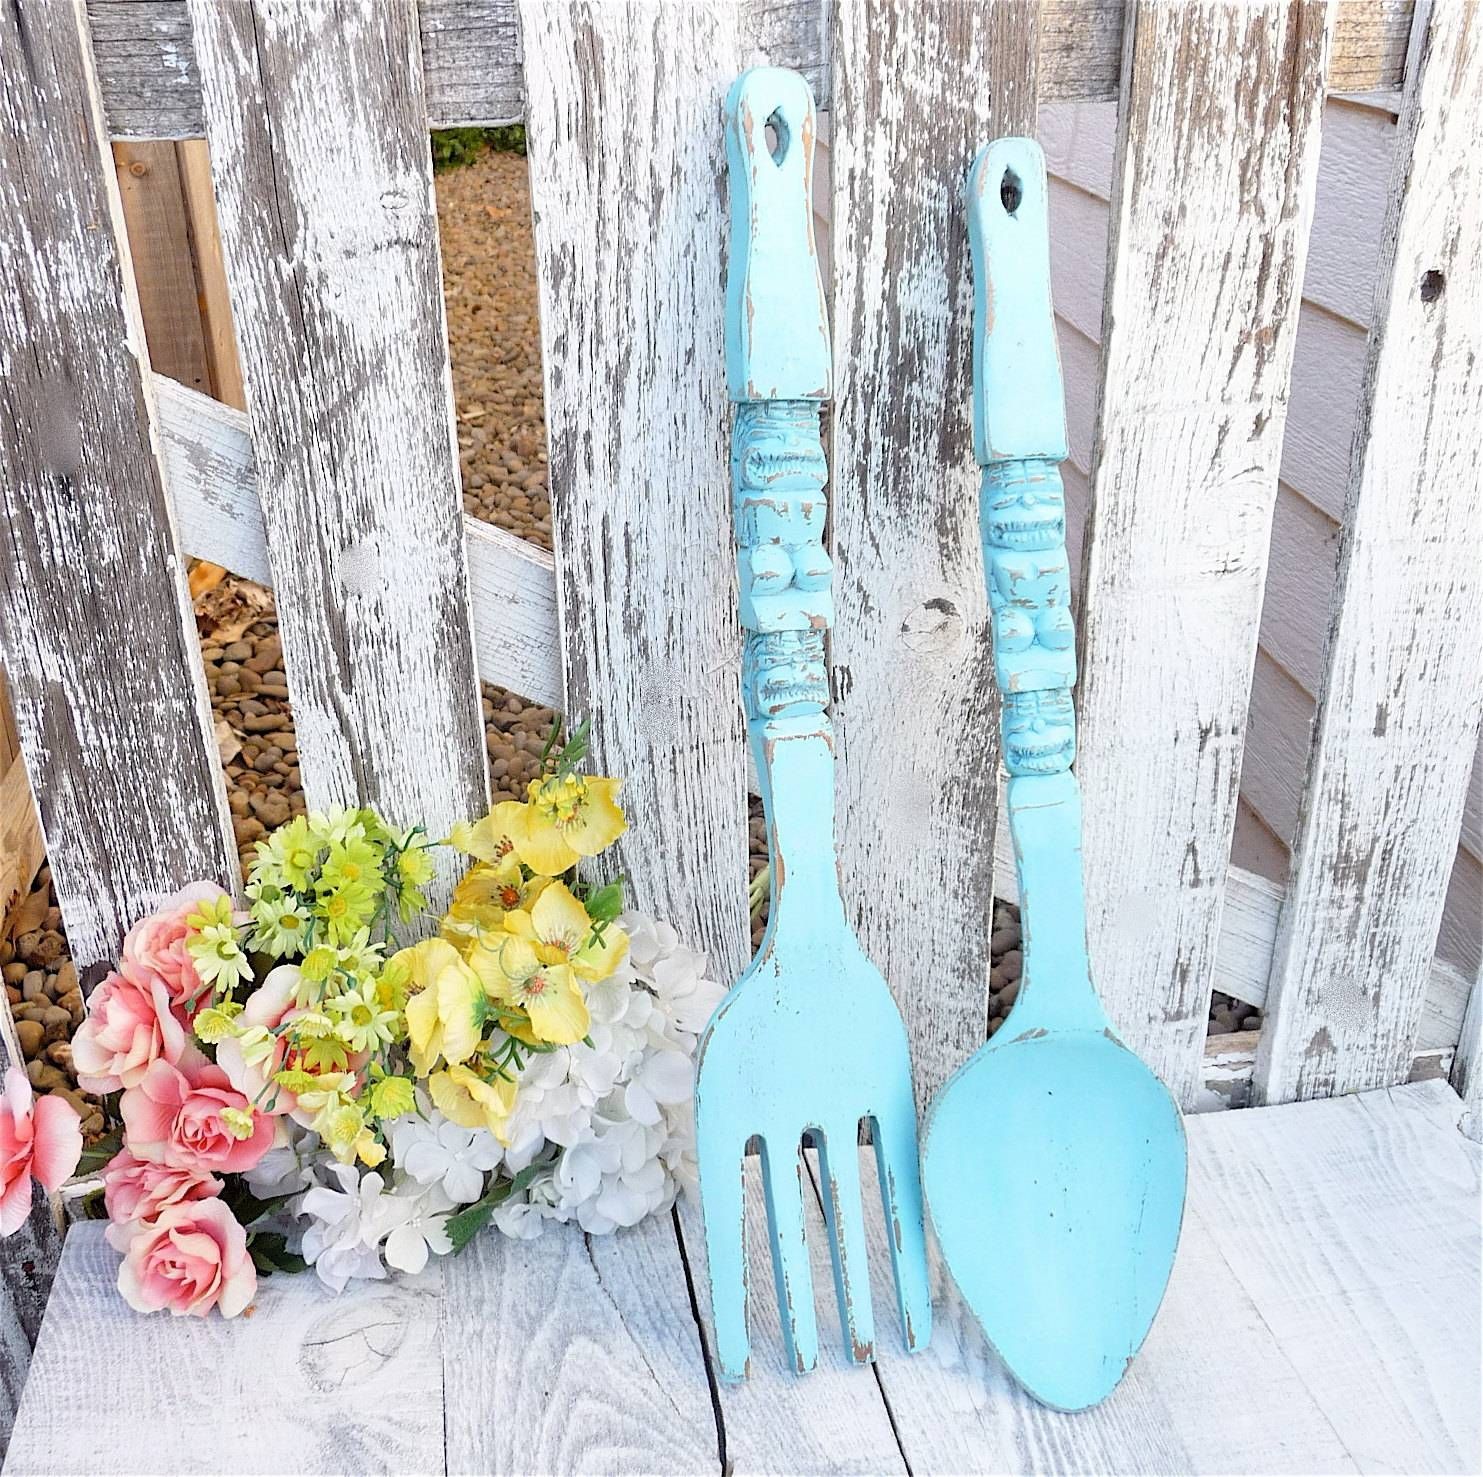 Giant Fork And Spoon Wall Decor | Design Ideas And Decor Throughout Latest Big Spoon And Fork Decors (View 14 of 25)